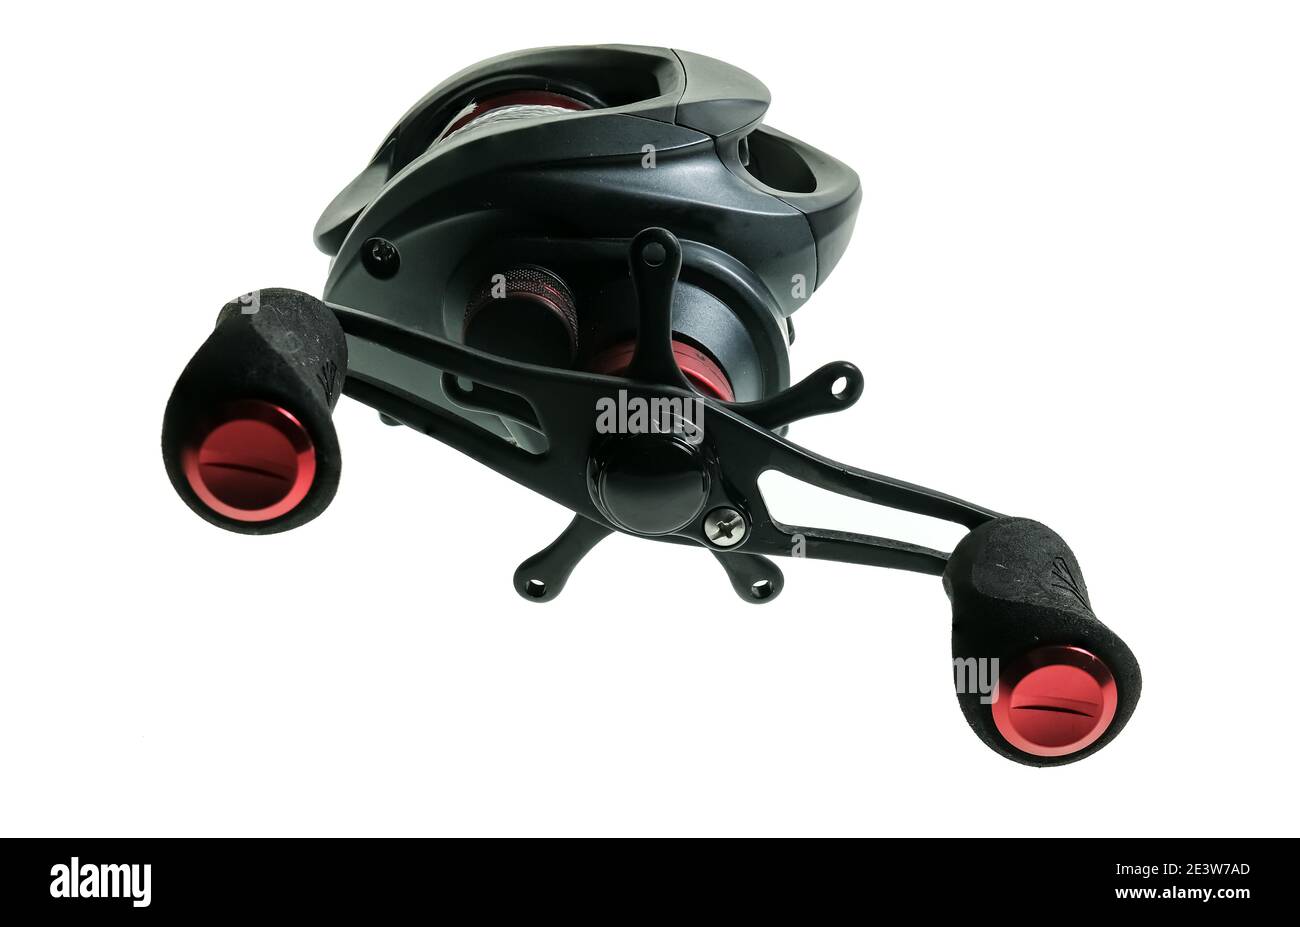 https://c8.alamy.com/comp/2E3W7AD/close-up-of-a-black-bait-caster-fishing-reel-spooled-with-braided-mailing-isolated-on-a-plain-white-background-2E3W7AD.jpg